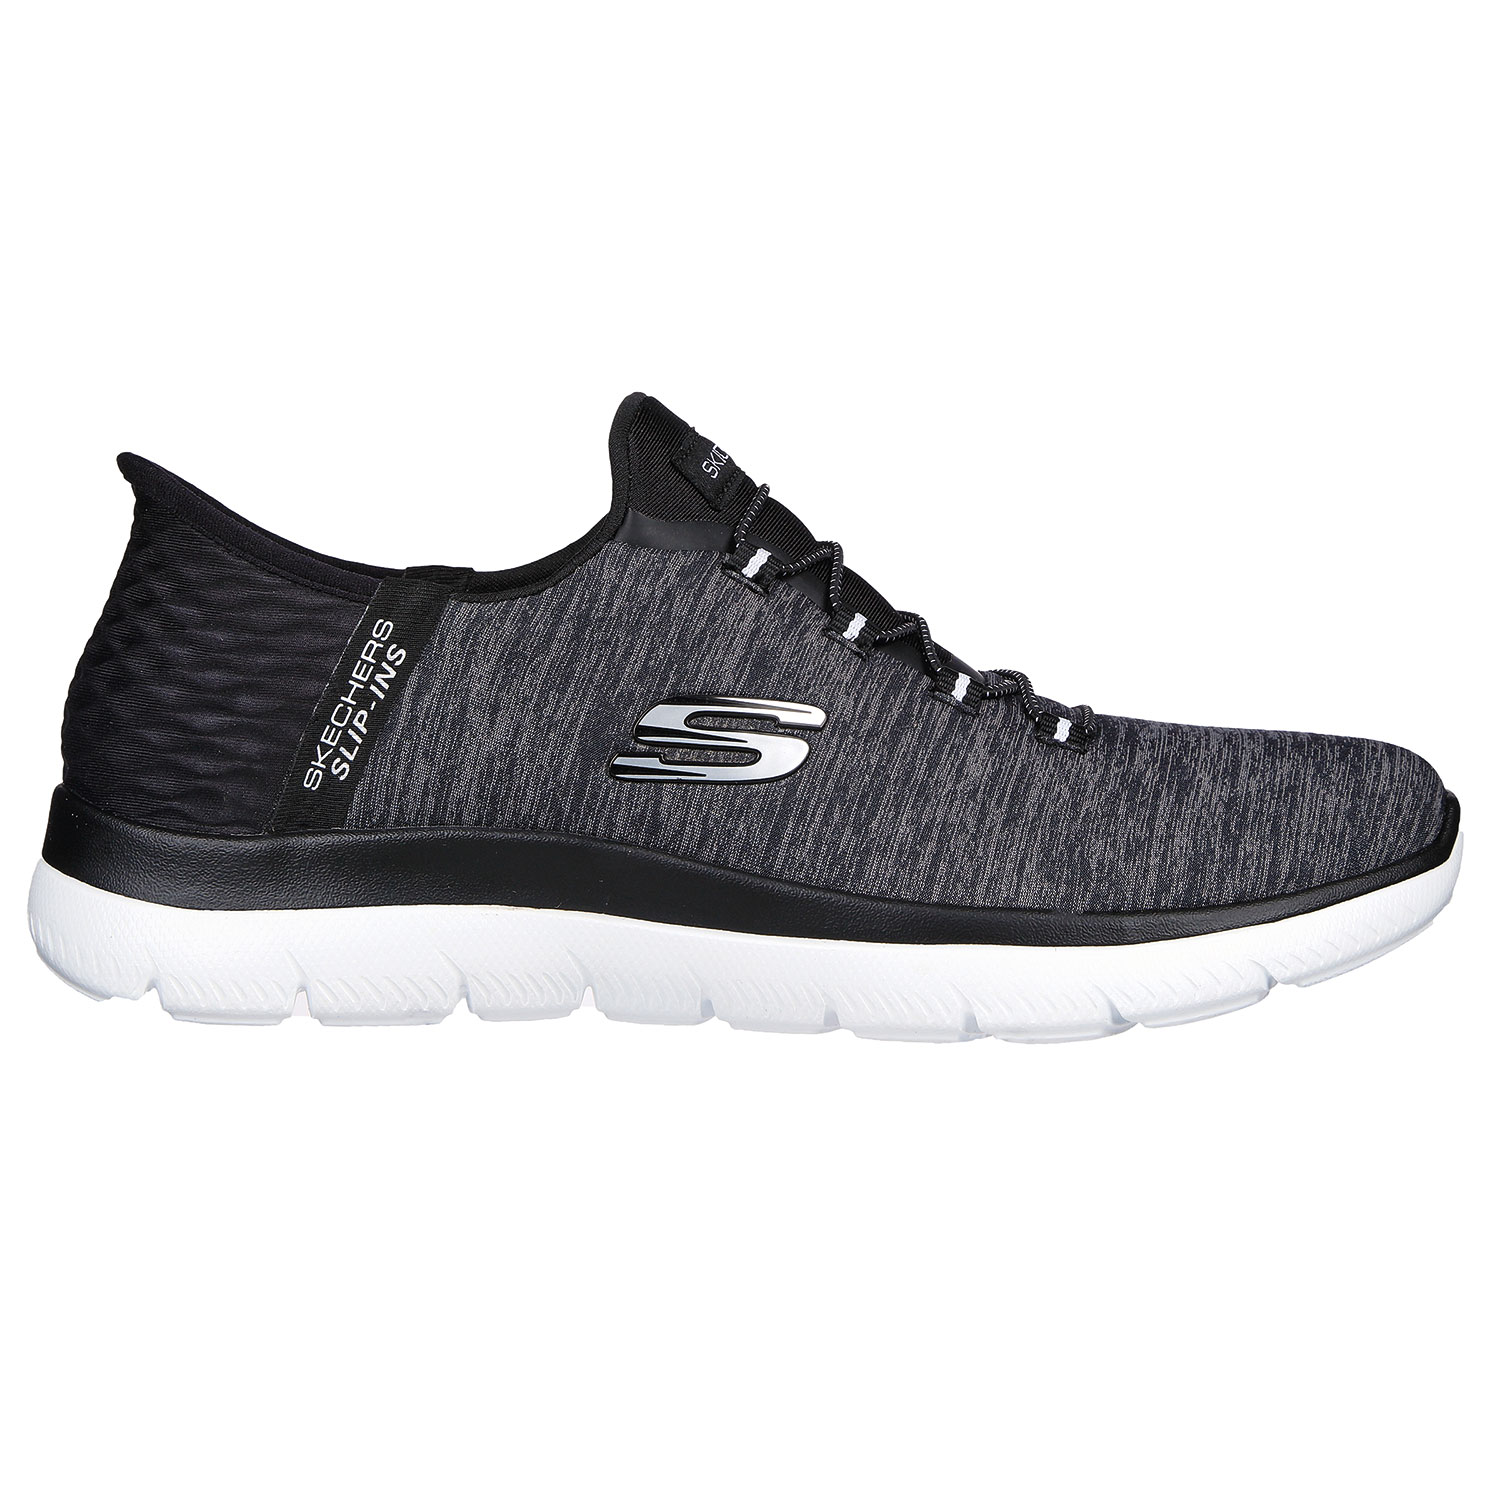 Product image for Skechers Summit Hands Free Slip-ins Dazzling Haze